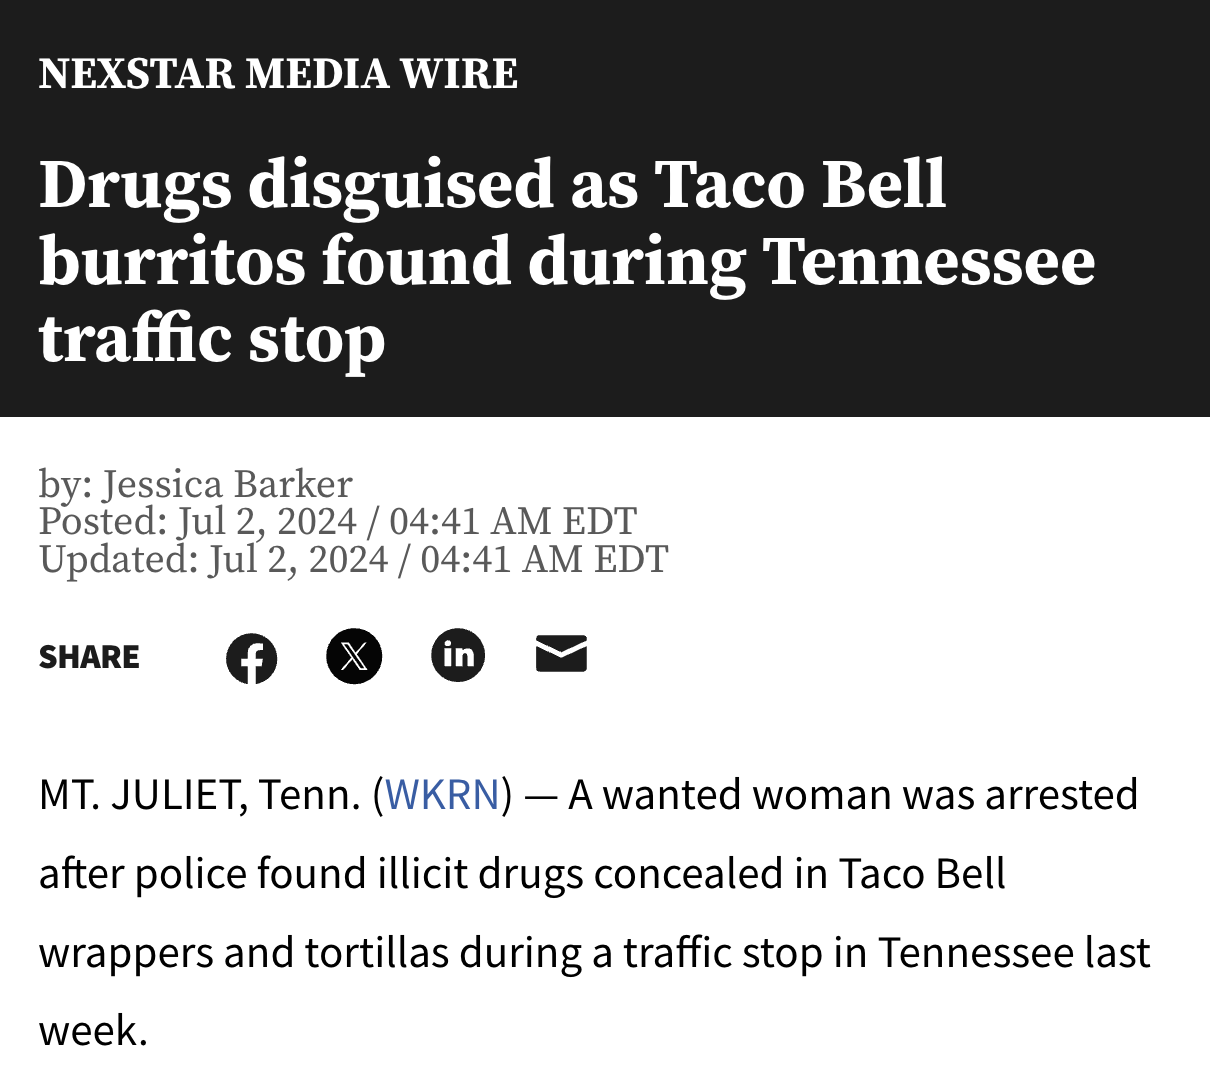 screenshot - Nexstar Media Wire Drugs disguised as Taco Bell burritos found during Tennessee traffic stop by Jessica Barker Posted Edt Updated Edt Ff X in Mt. Juliet, Tenn. Wkrn A wanted woman was arrested after police found illicit drugs concealed in Tac